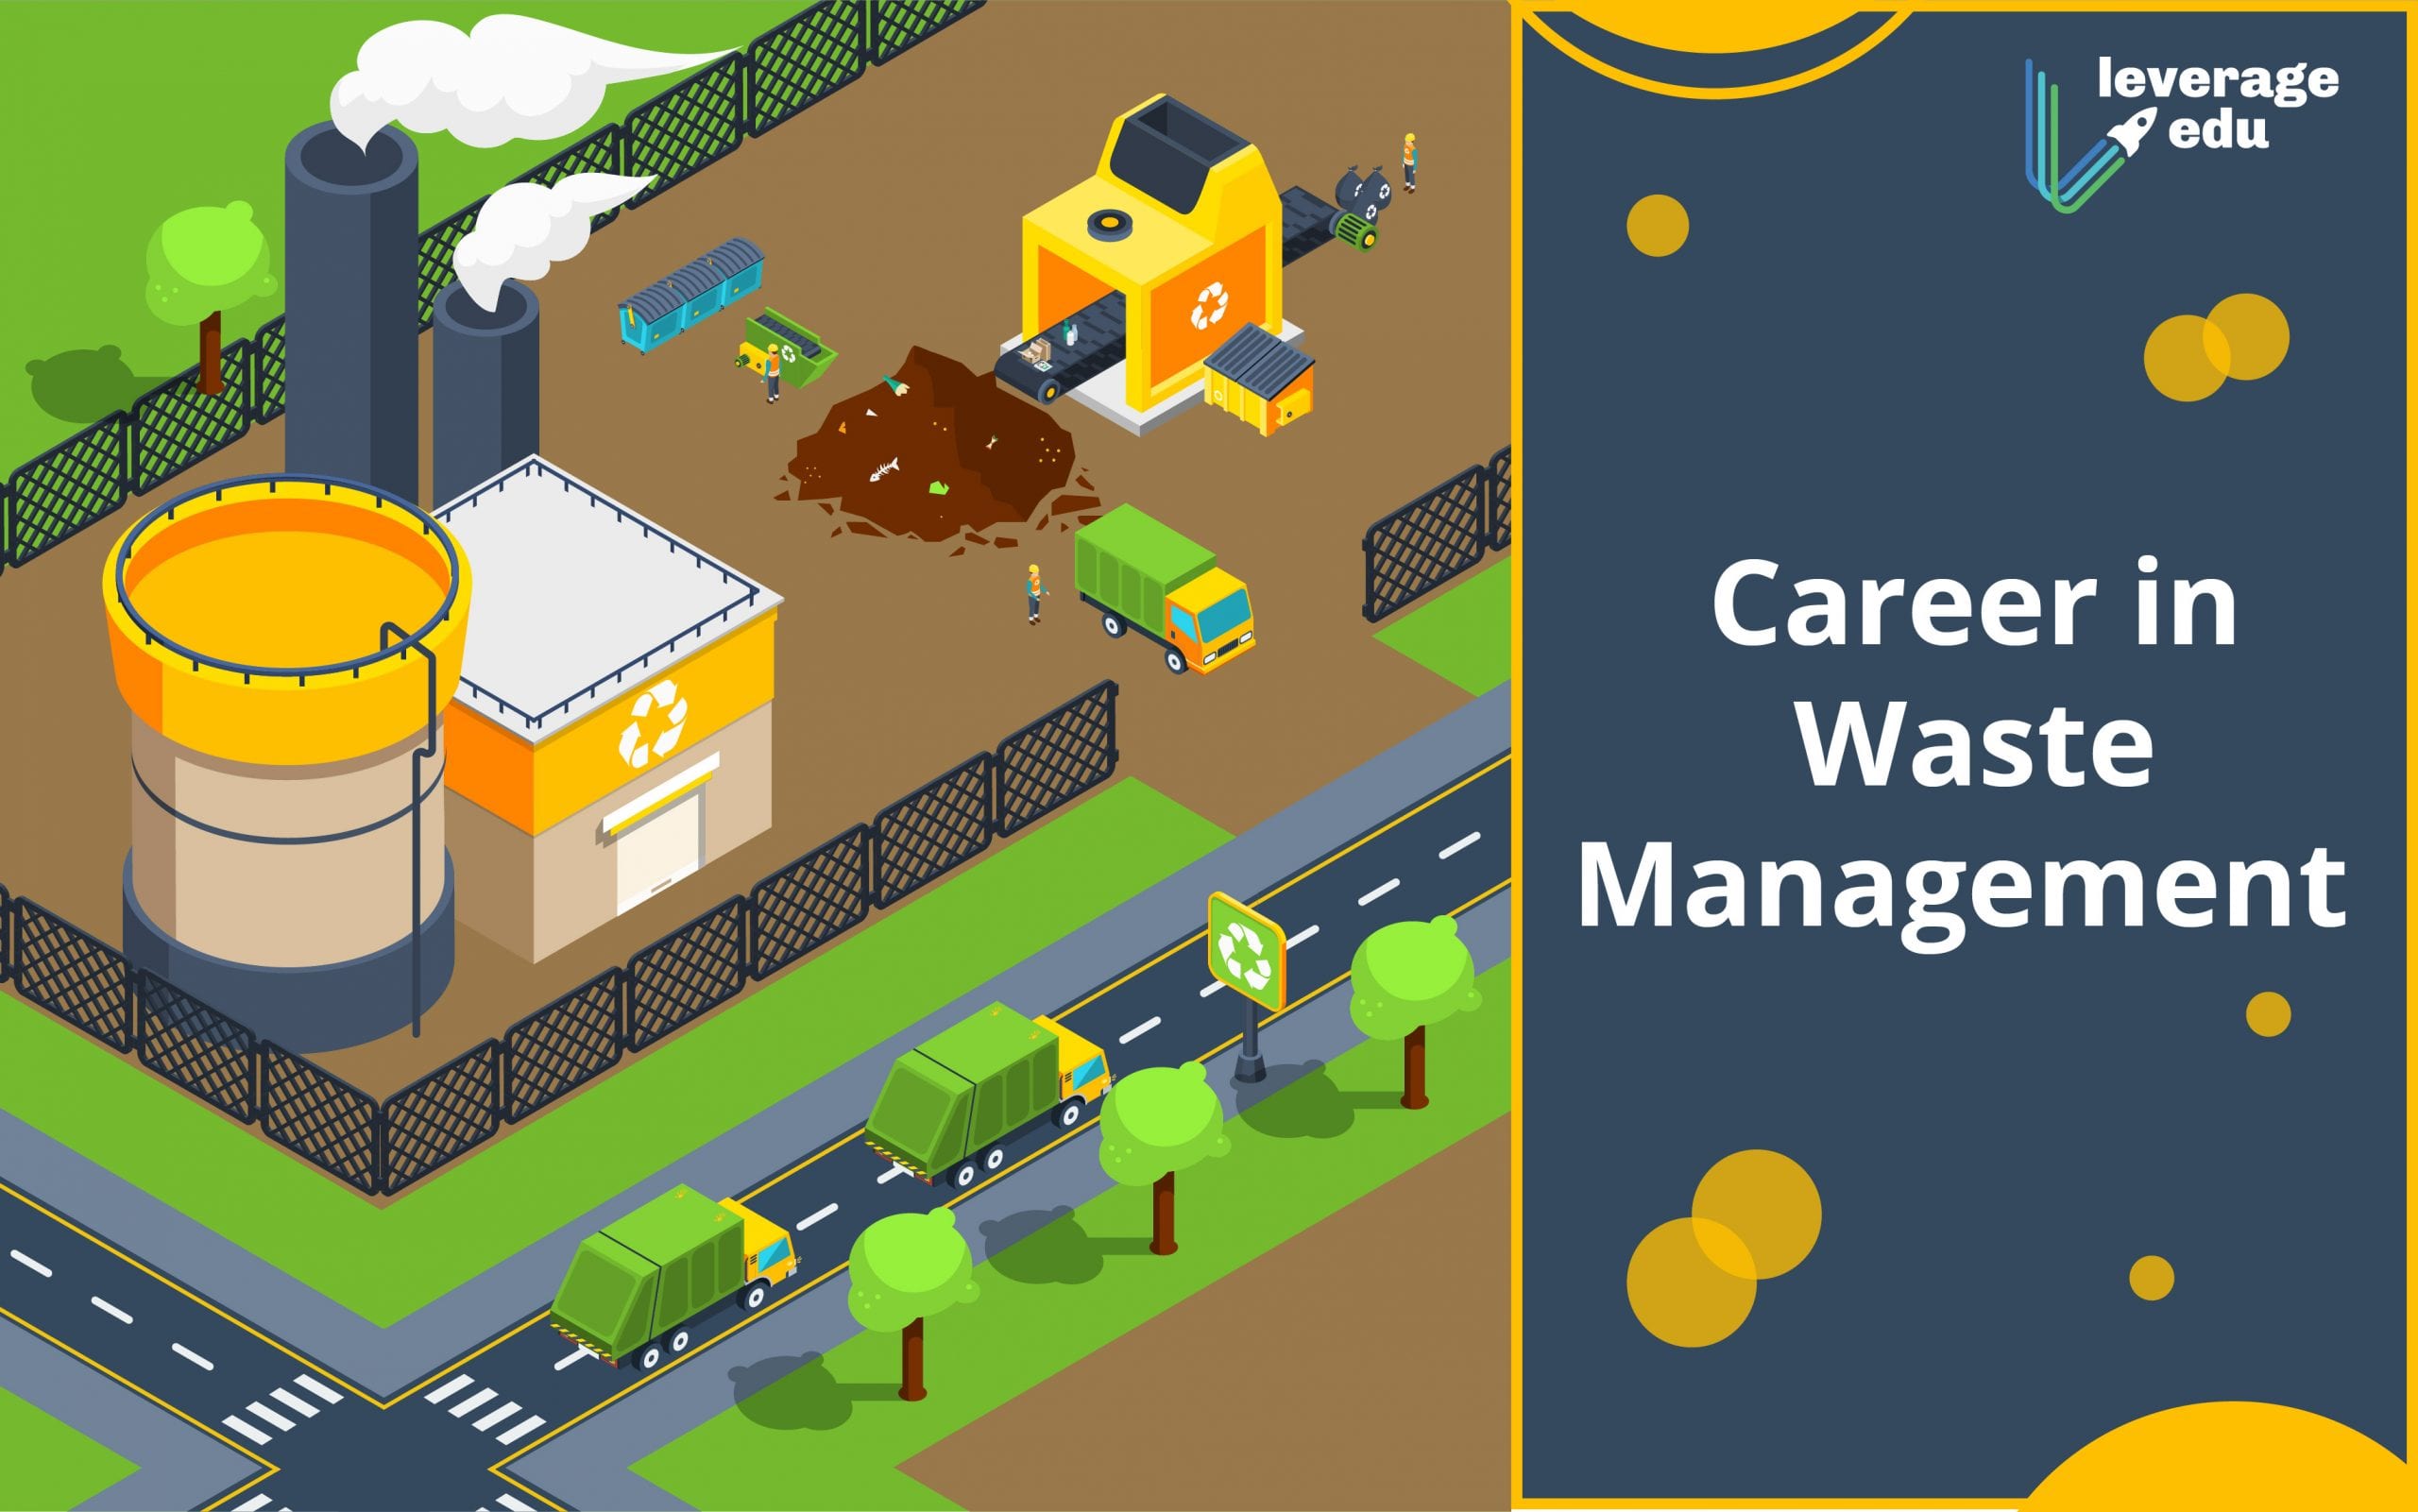 Comment on Career in Waste Management by Team Leverage Edu